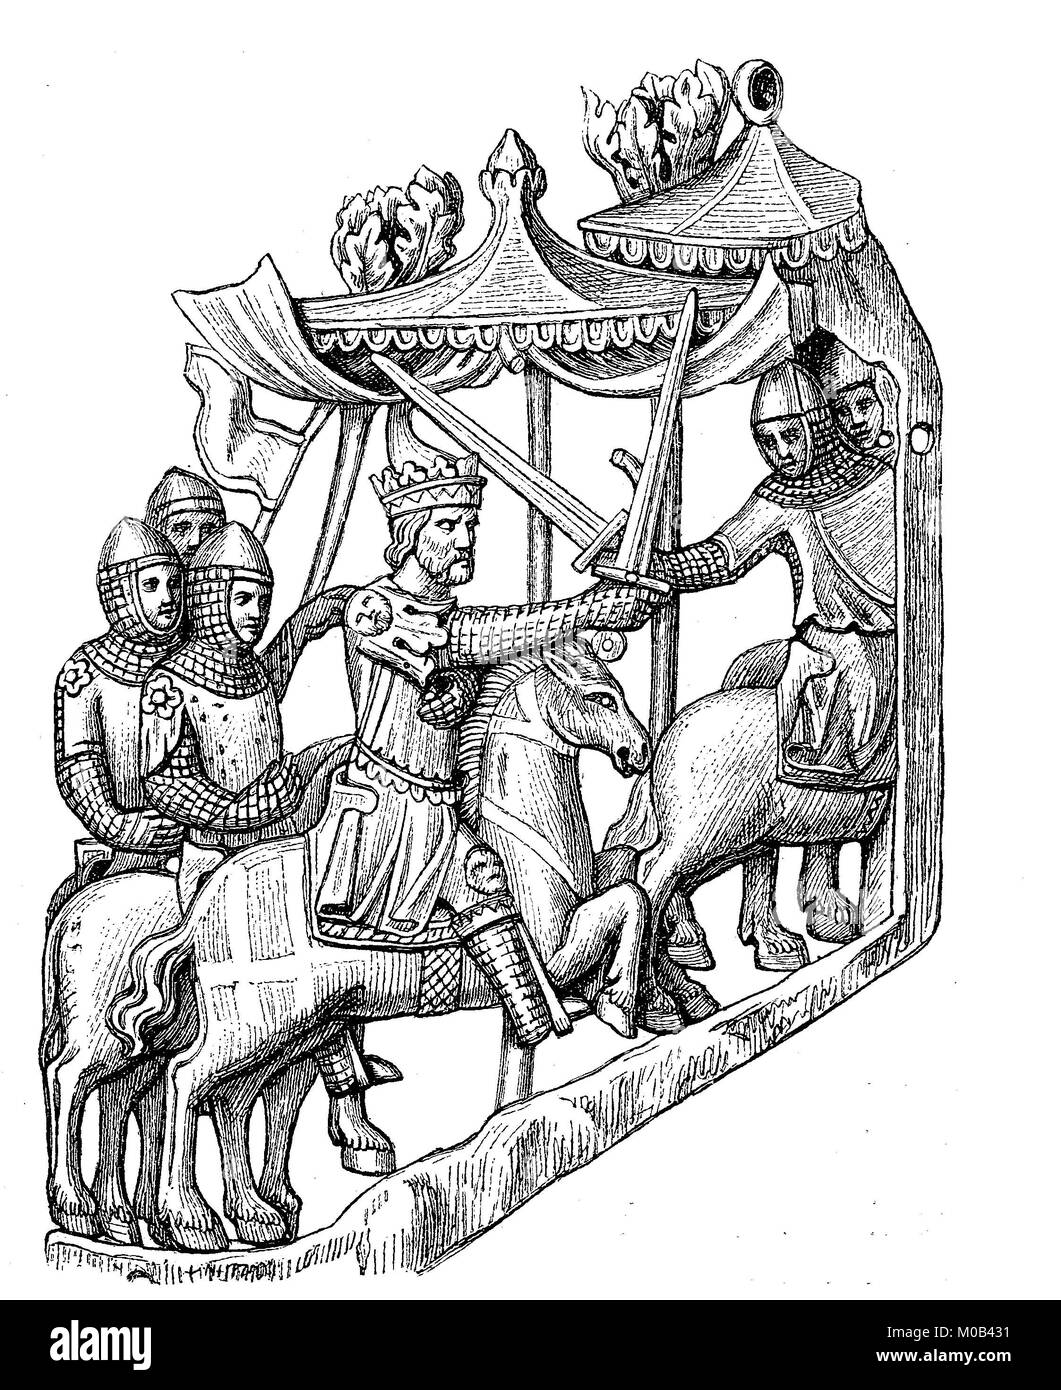 Ivory carving shows King Adolf in a scuffle at the end of the 13th century, at the time of the Battle of Göllheim, in the Germanisches Museum zu Nürnberg, uremberg, Germany, digital improved reproduction of an original print from 1880 Stock Photo